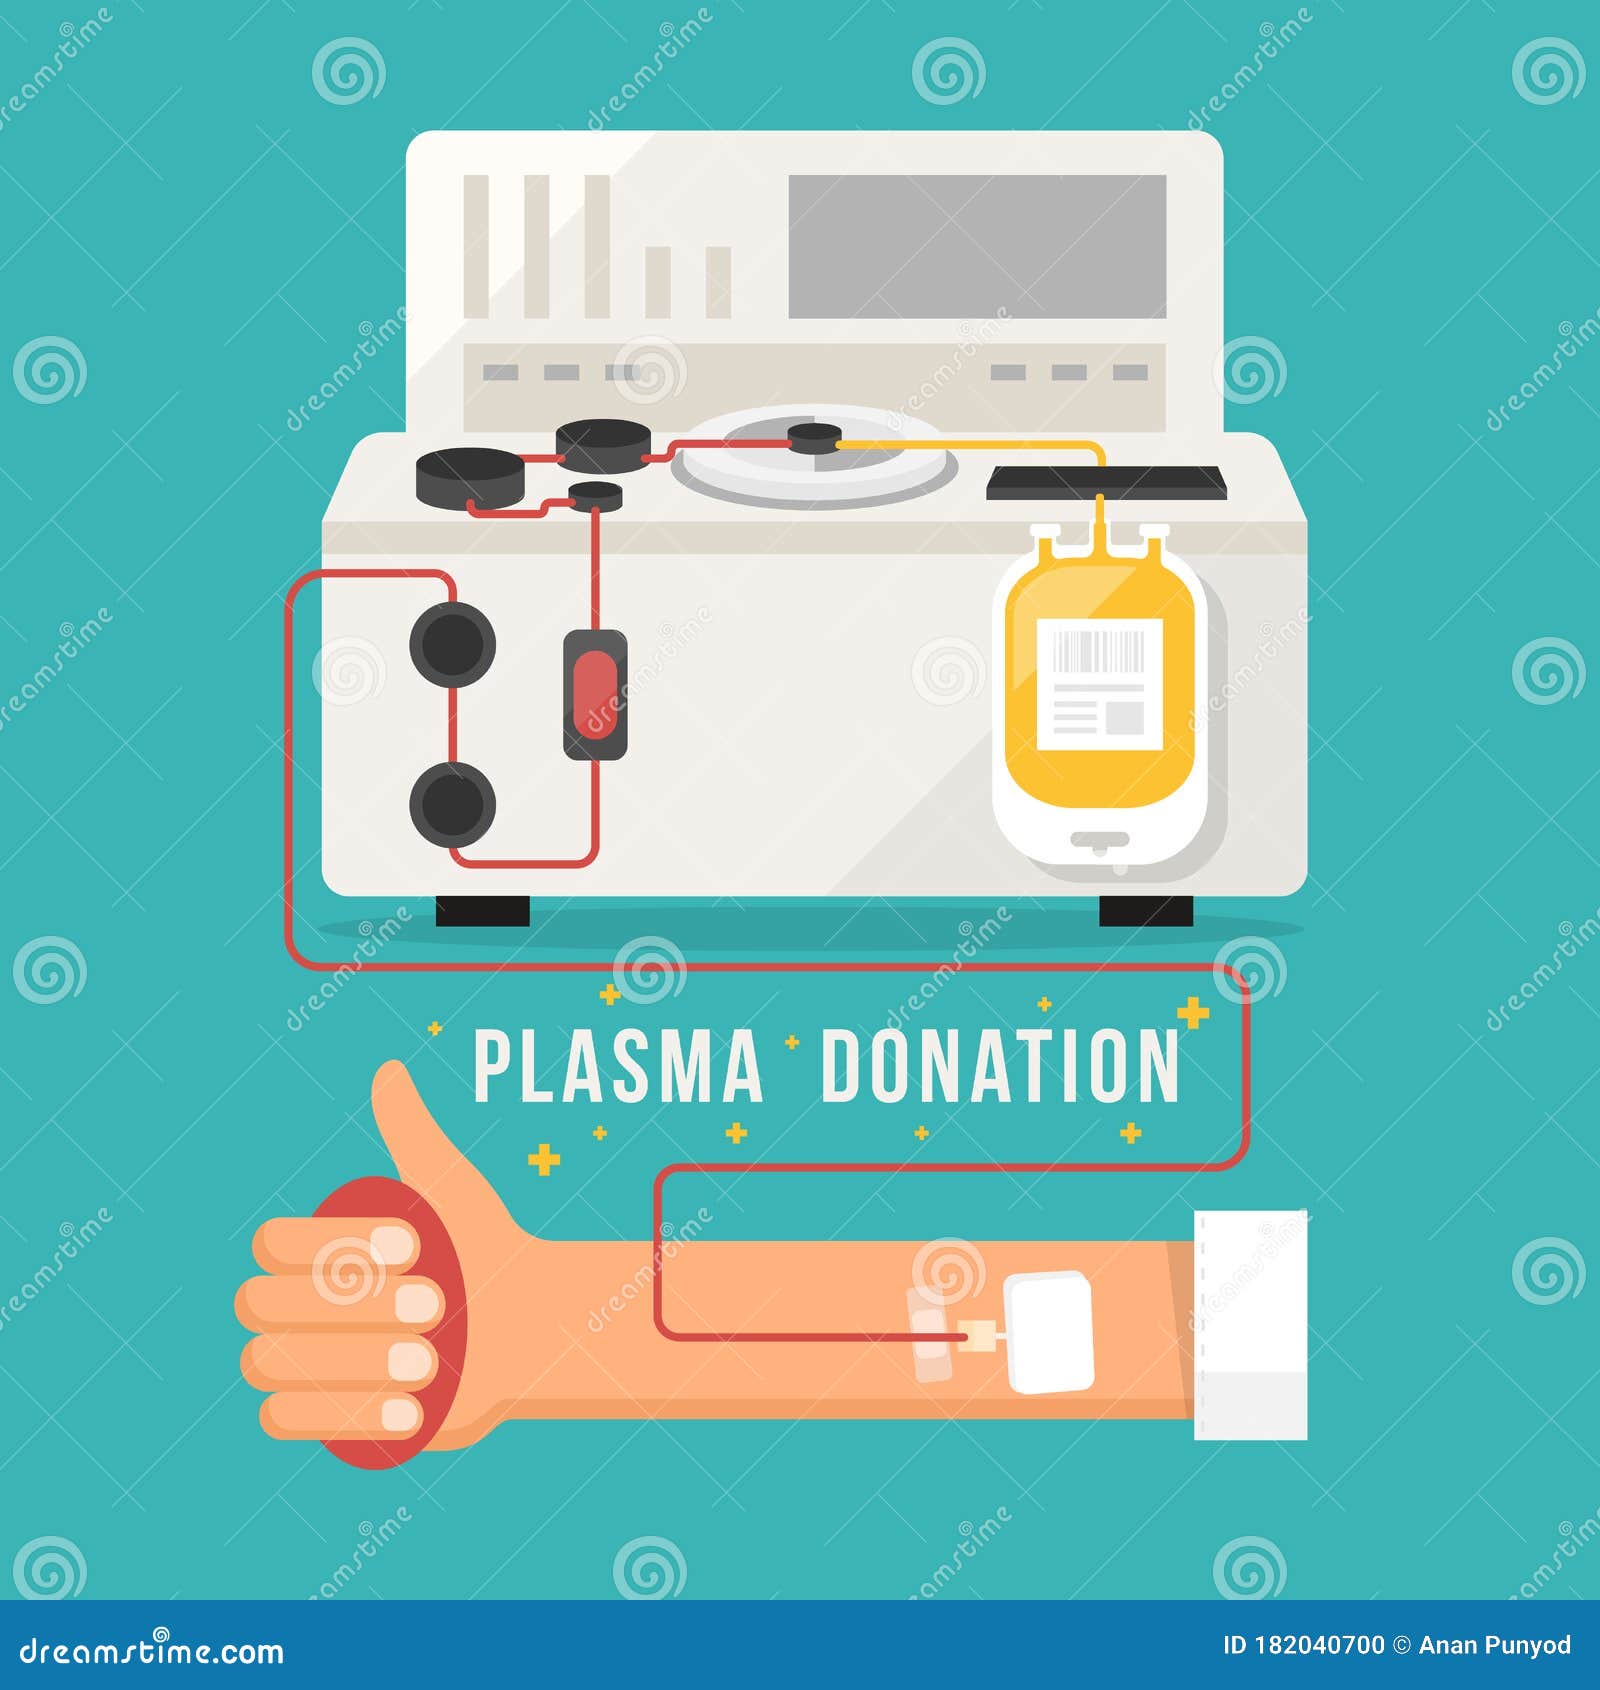 plasma donation concept with blood donated from the arm into platelet machines and plasma bag  